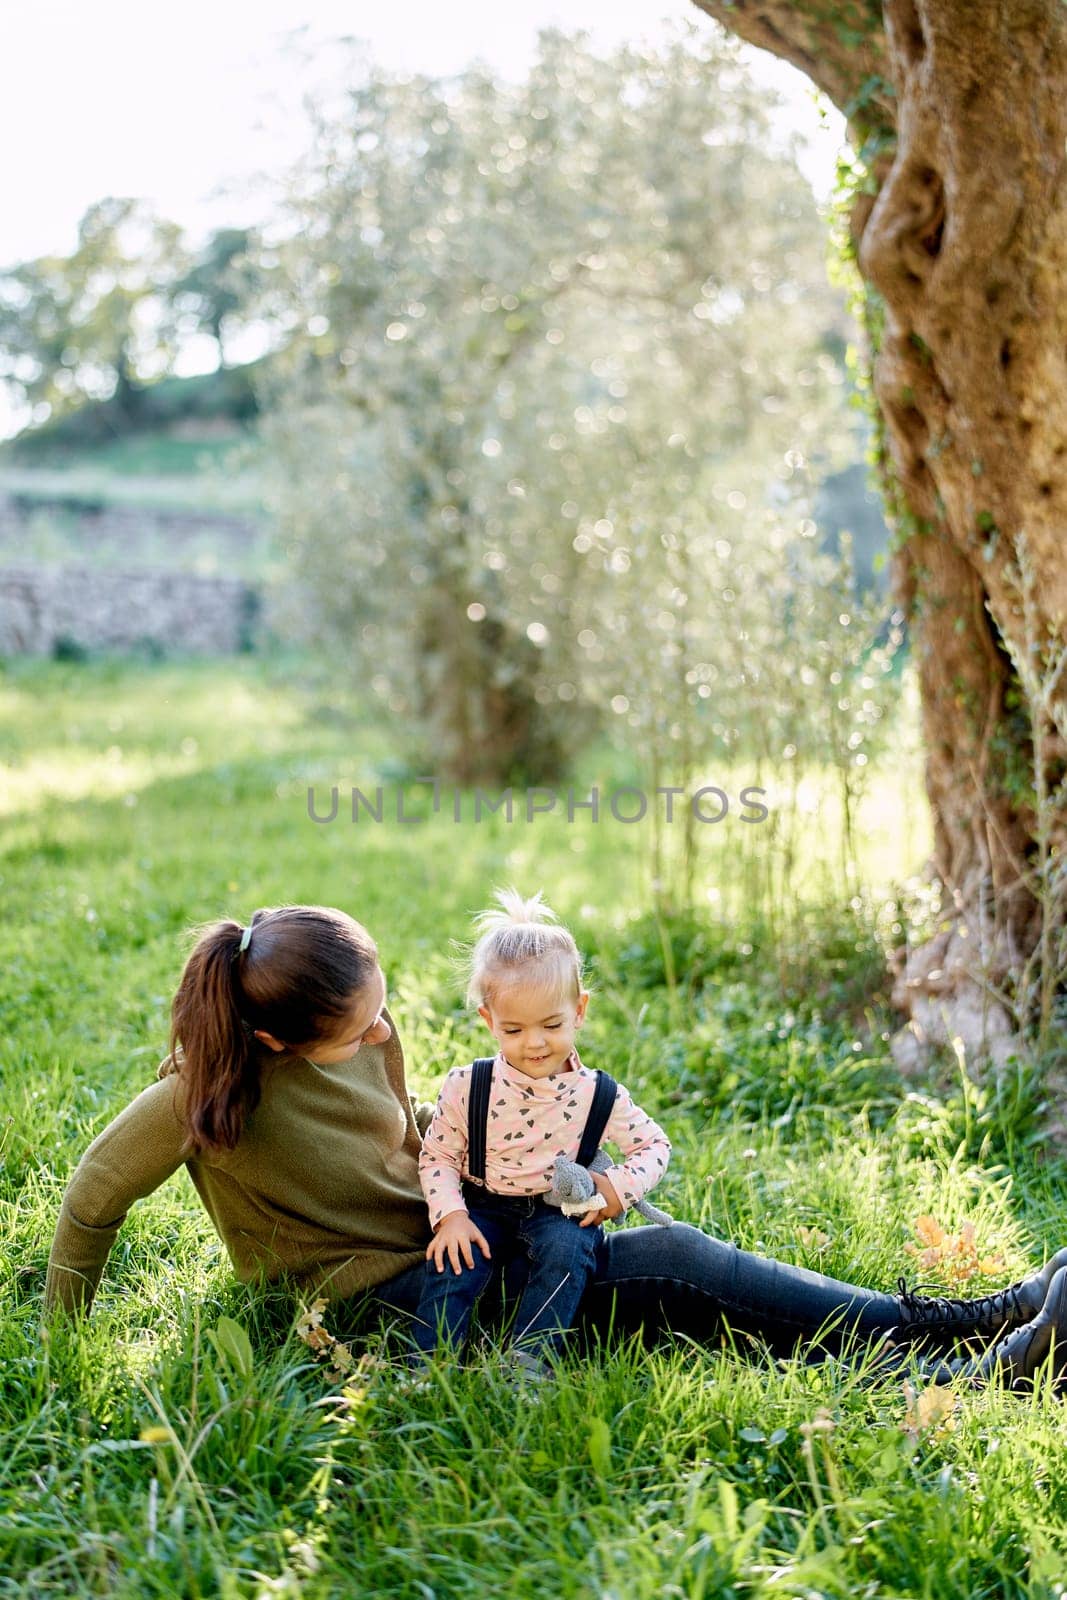 Mom looks at a little girl sitting on her lap near a tree by Nadtochiy